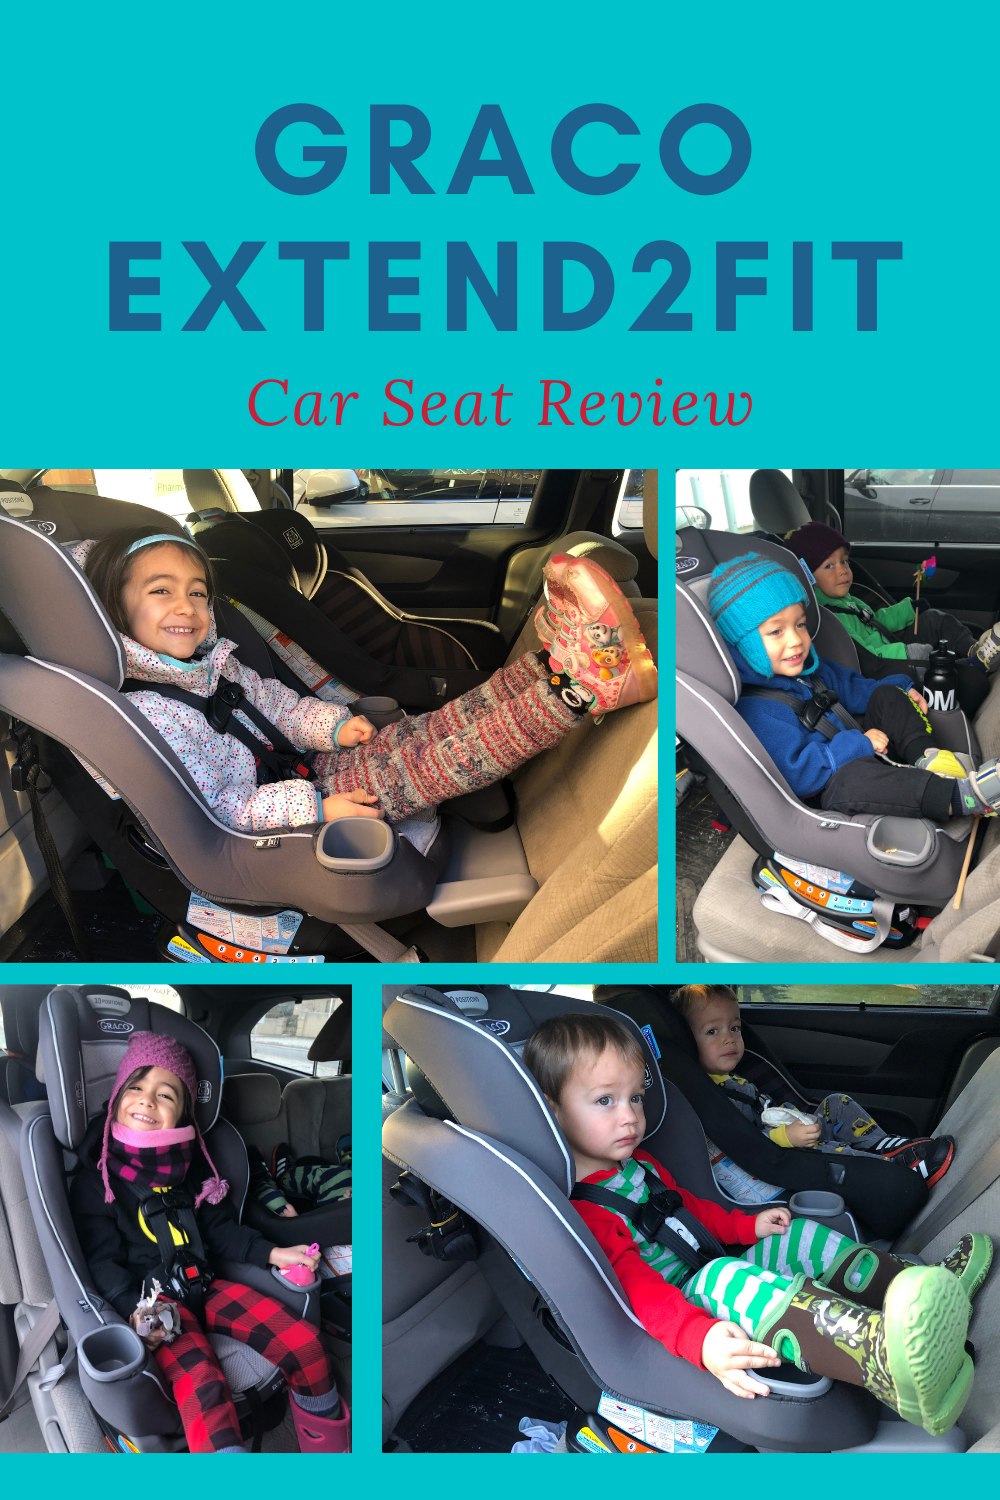 Graco Extend2Fit Car Seat Review